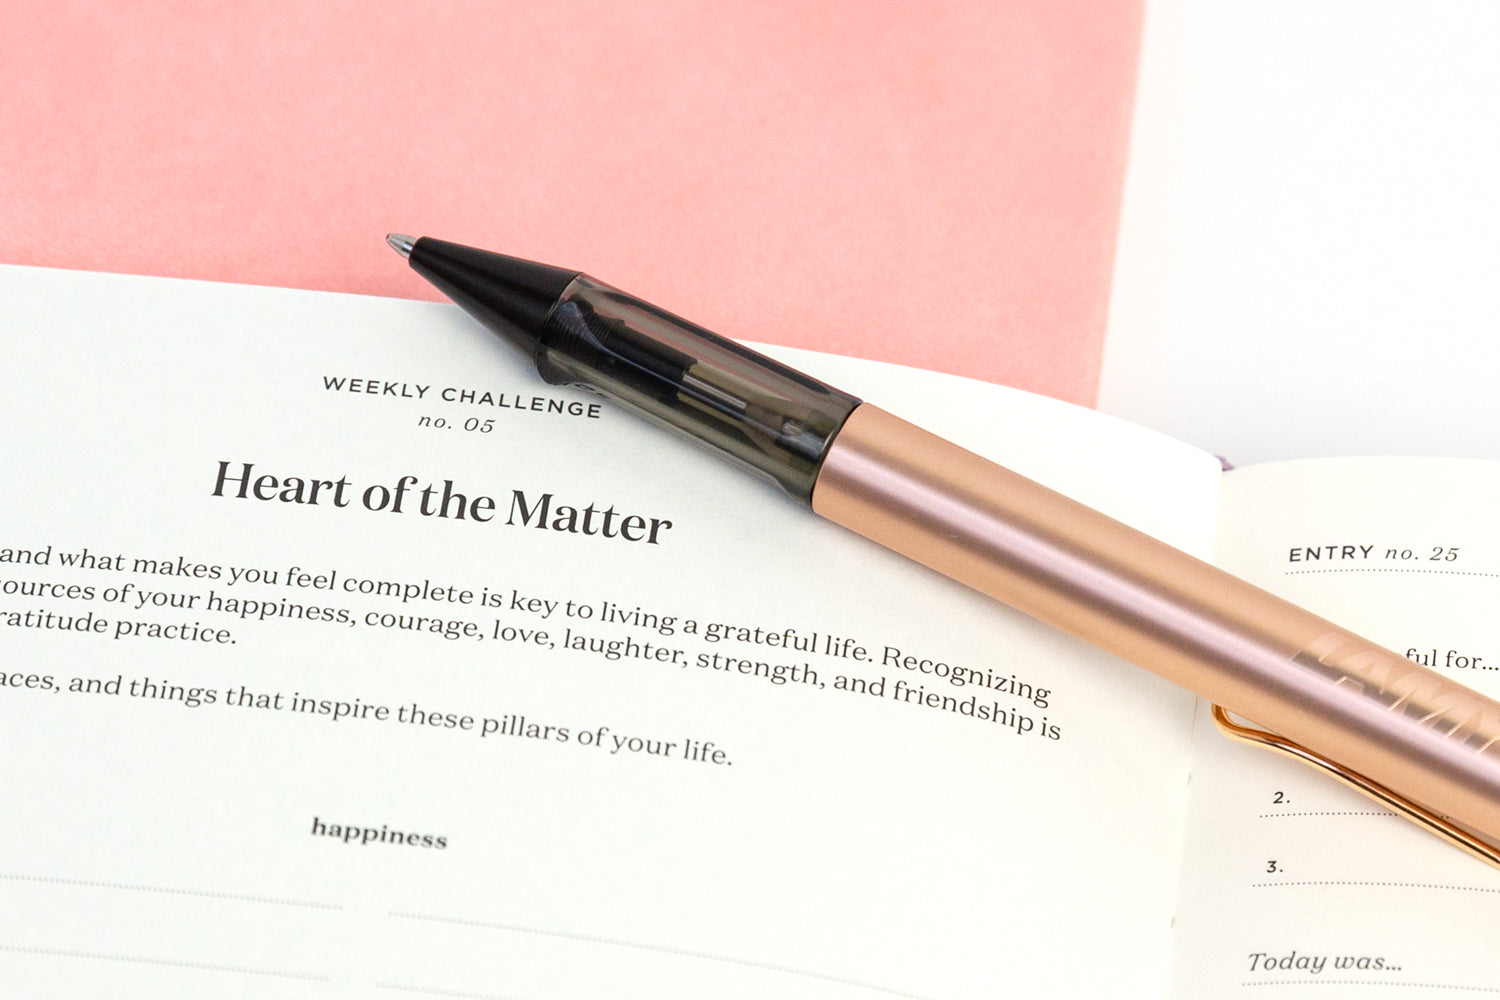 A notebook open to a page that says "Heart of the Matter" and a pink and black pen lies on top.